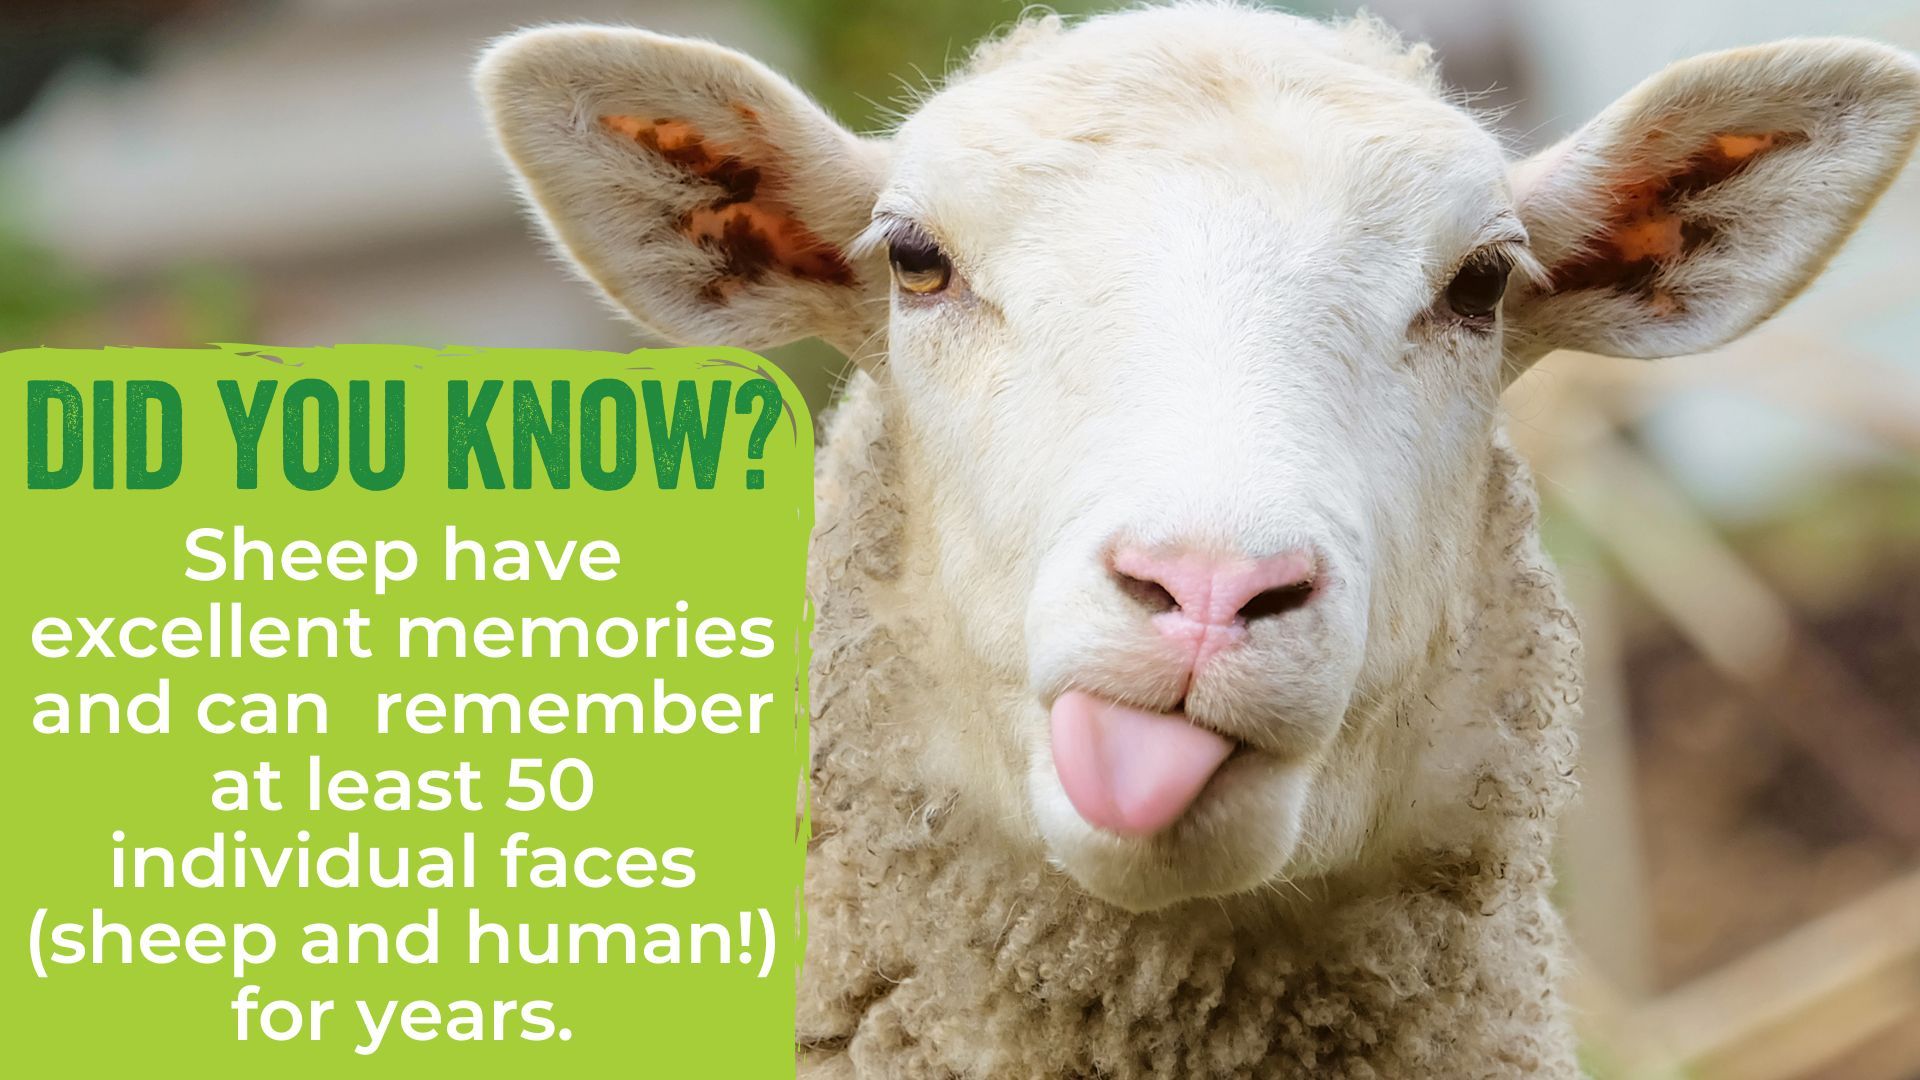 Sheep have excellent memories and can remember at least 50 individual faces (sheep and human!) for years.